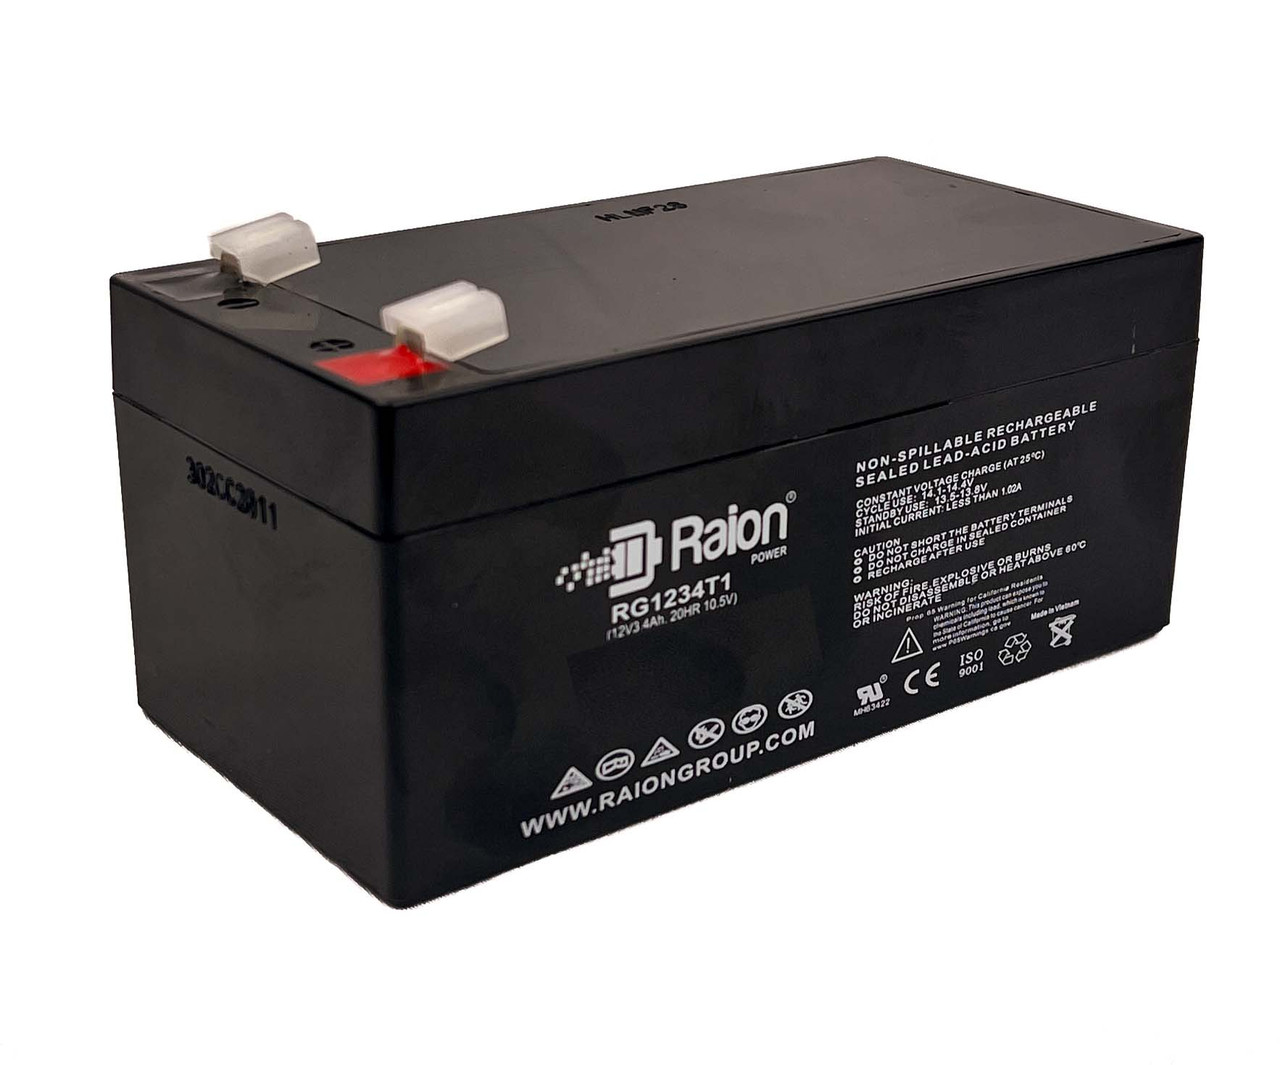 Raion Power 12V 3.4Ah Non-Spillable Replacement Battery for Q-Batteries 12LS-3.4